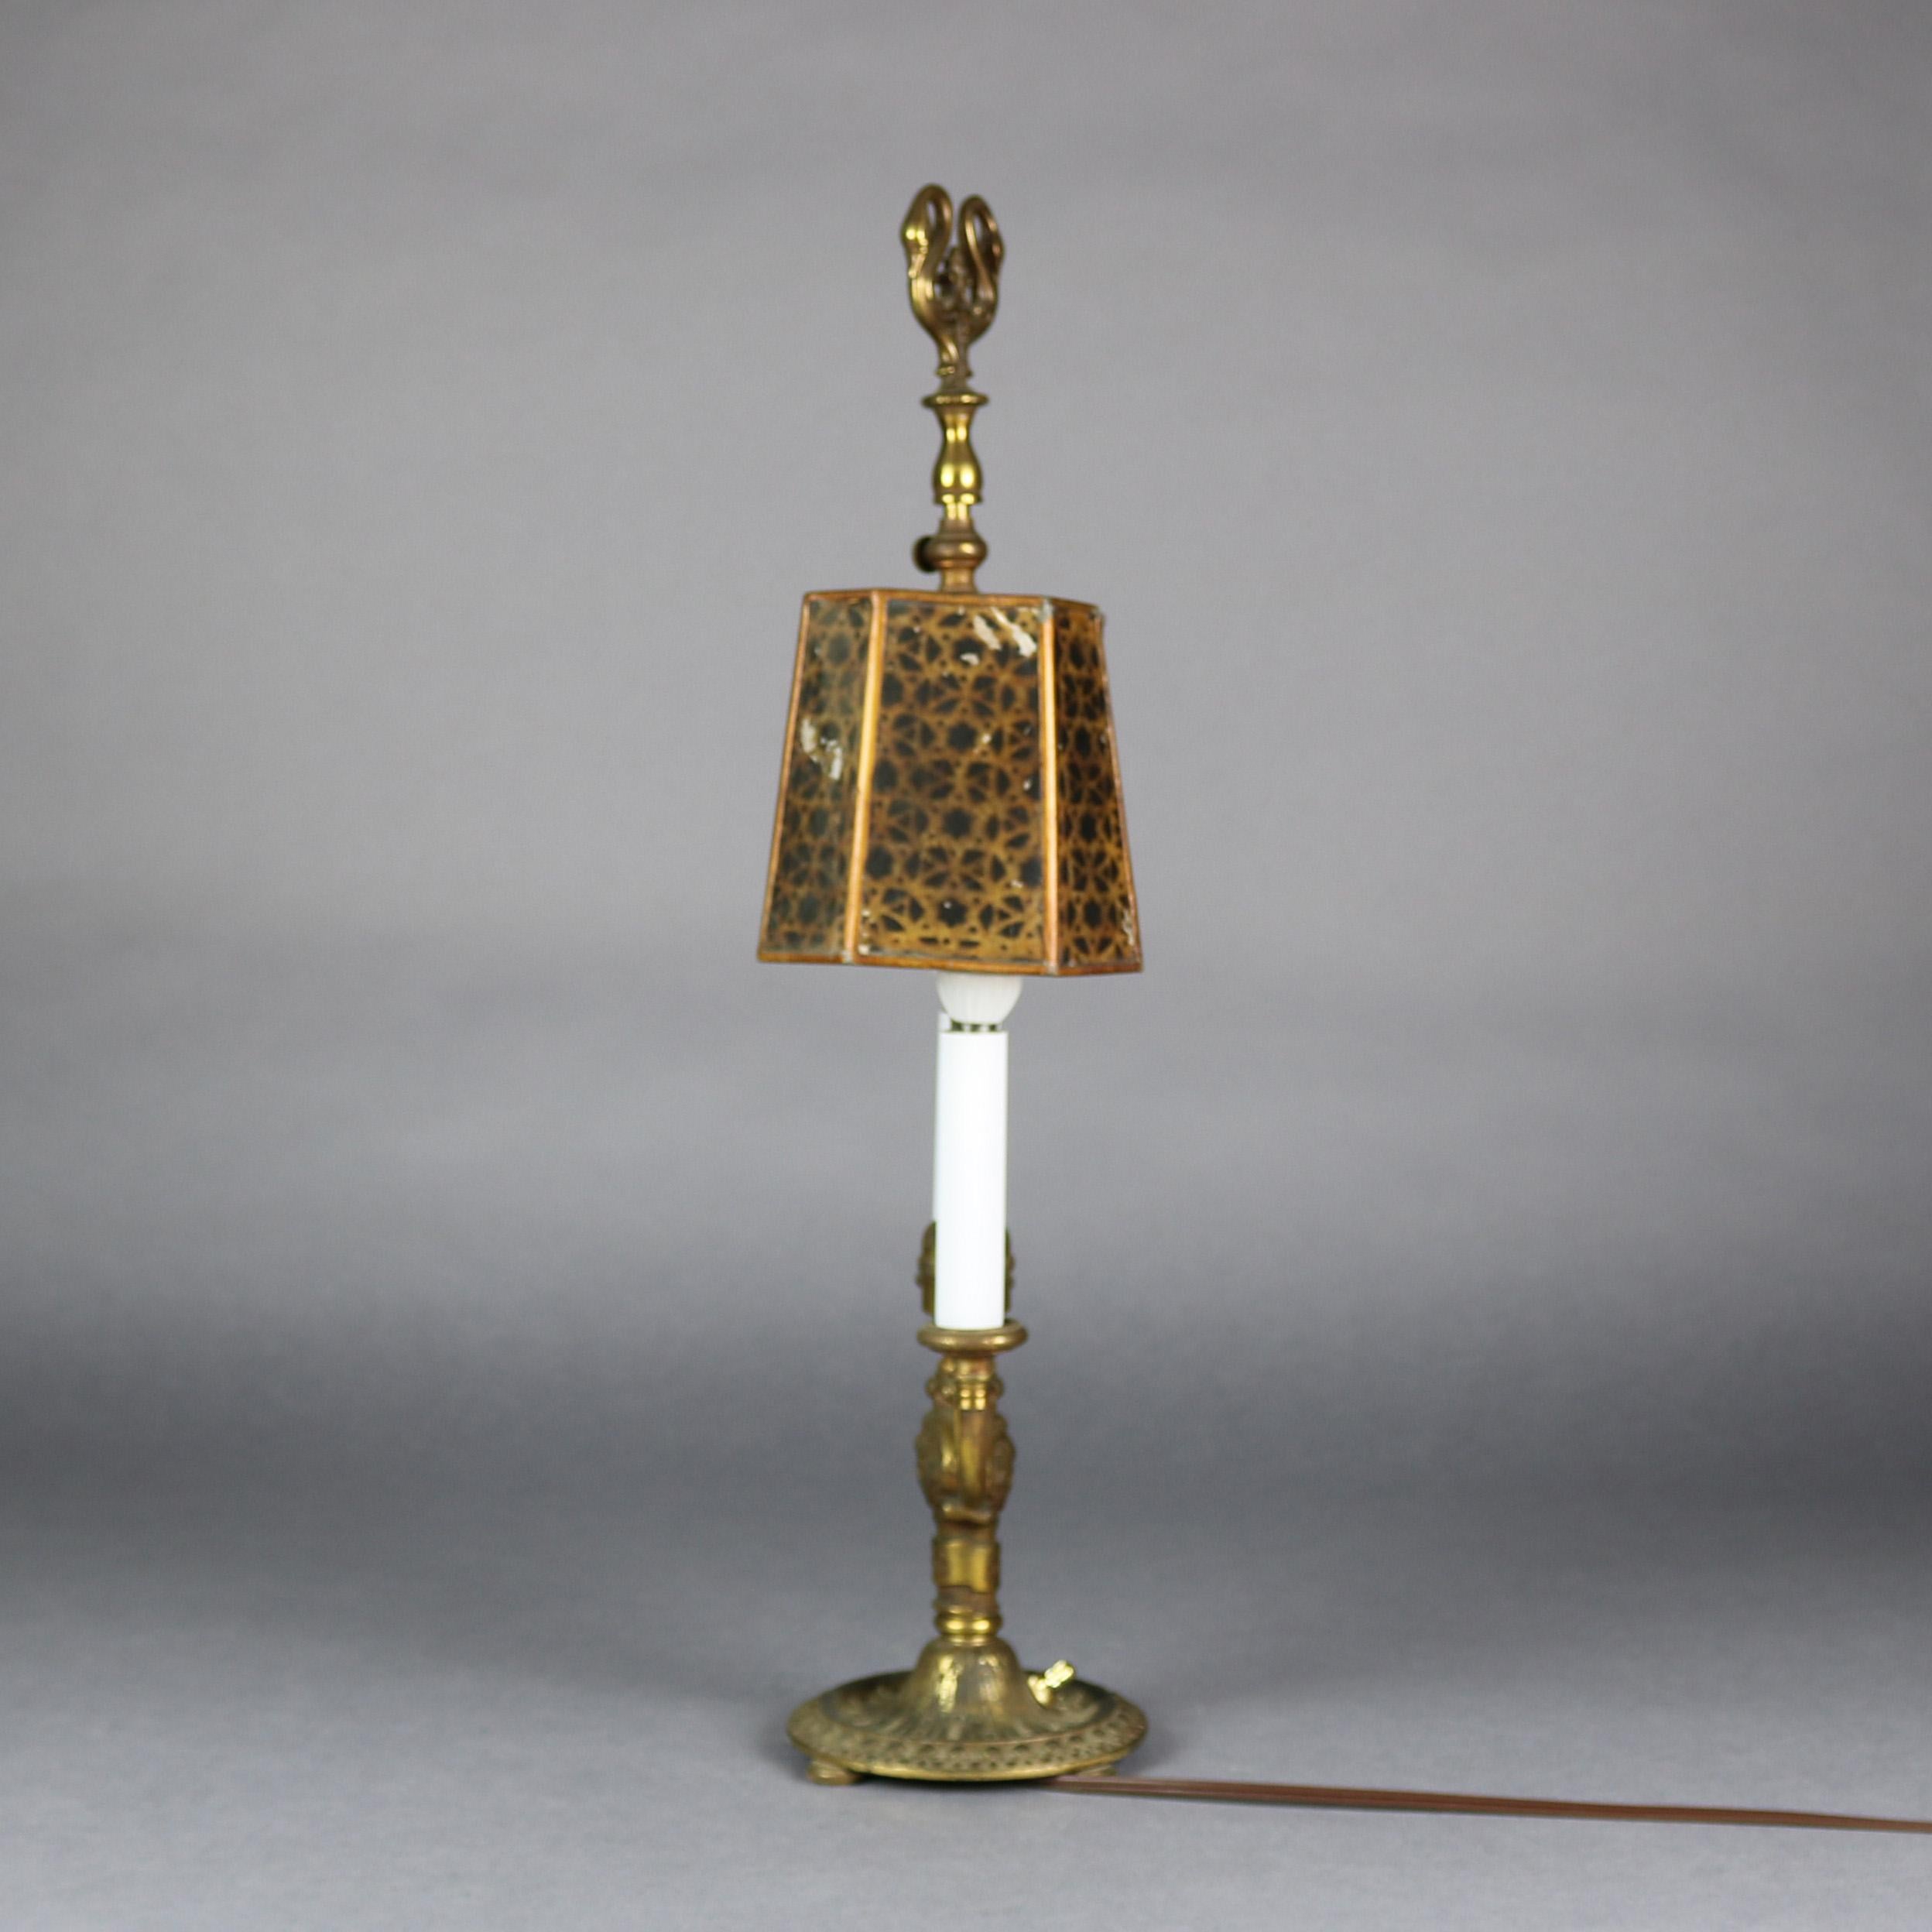 Antique Bouillotte table or desk lamp by Rembrandt features Bouillotte table lamp figural bast with column having mask flanked by two C-scroll arms terminating in candle lights, mica shade with swan form finial, gilt and ebonized shade reminiscent